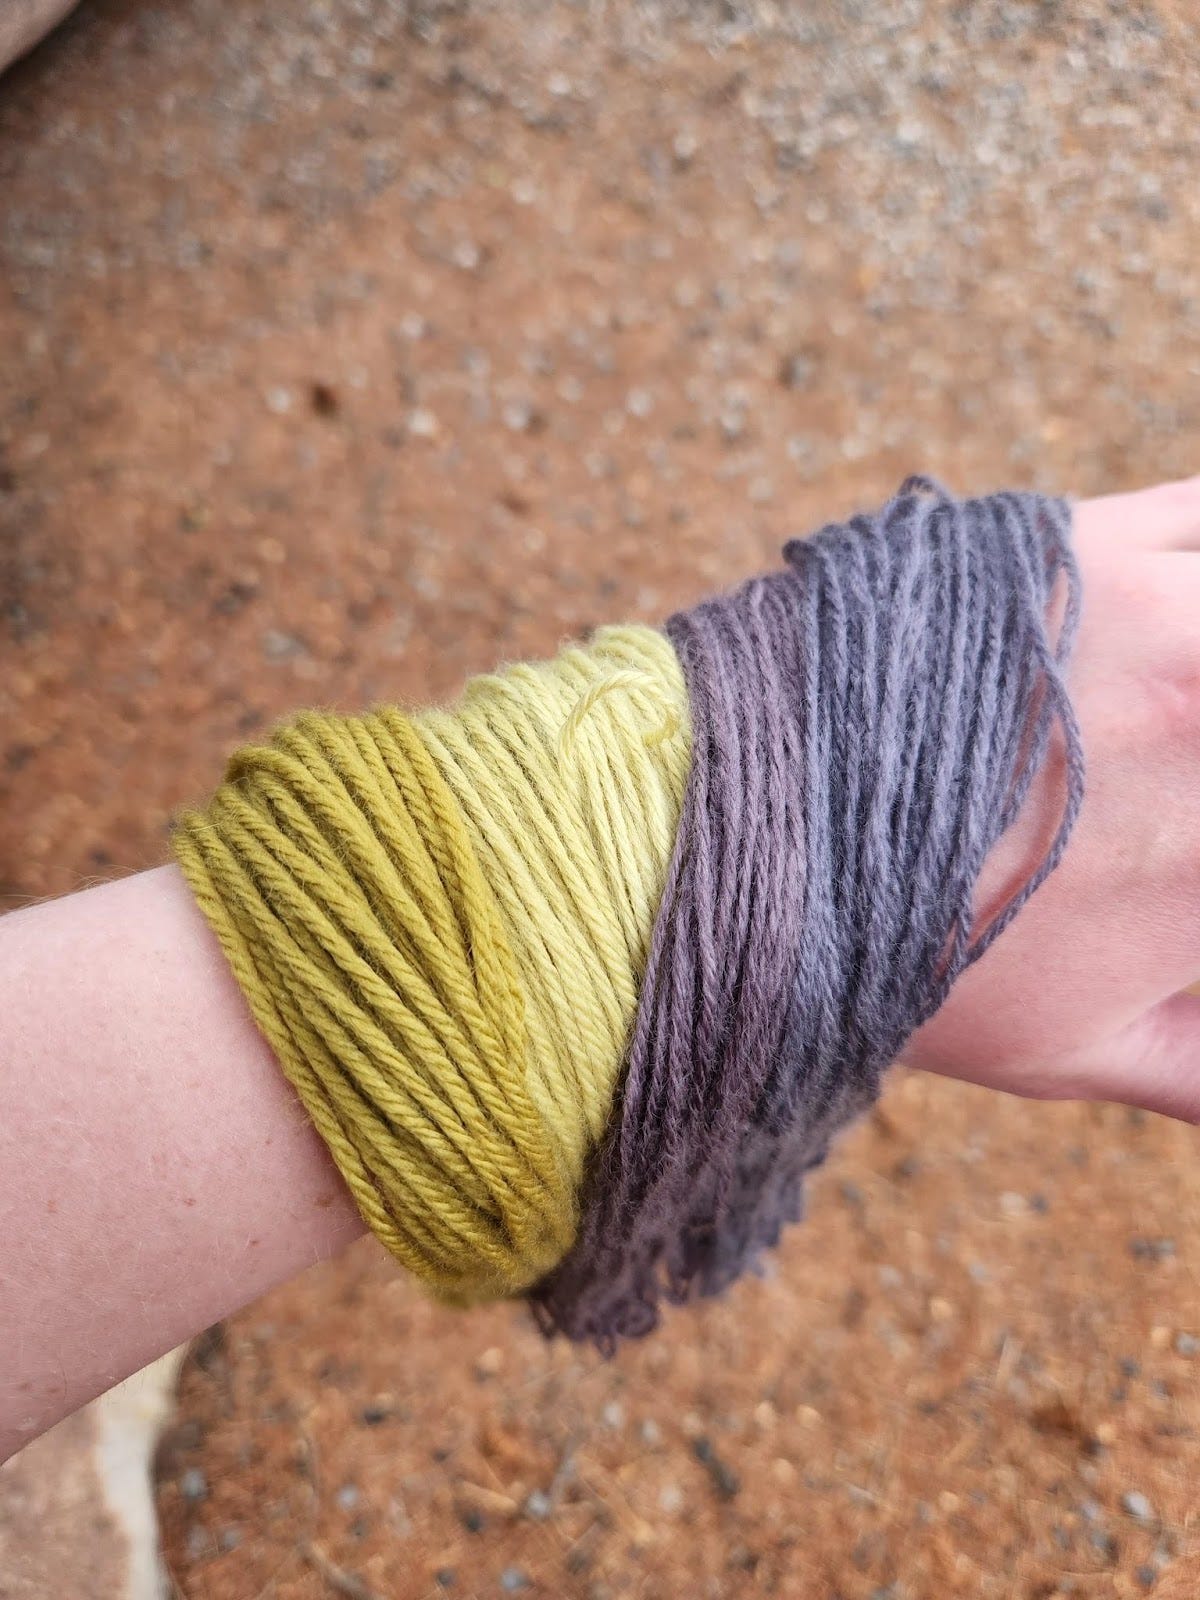 Different colored yarn draped over a person's arm